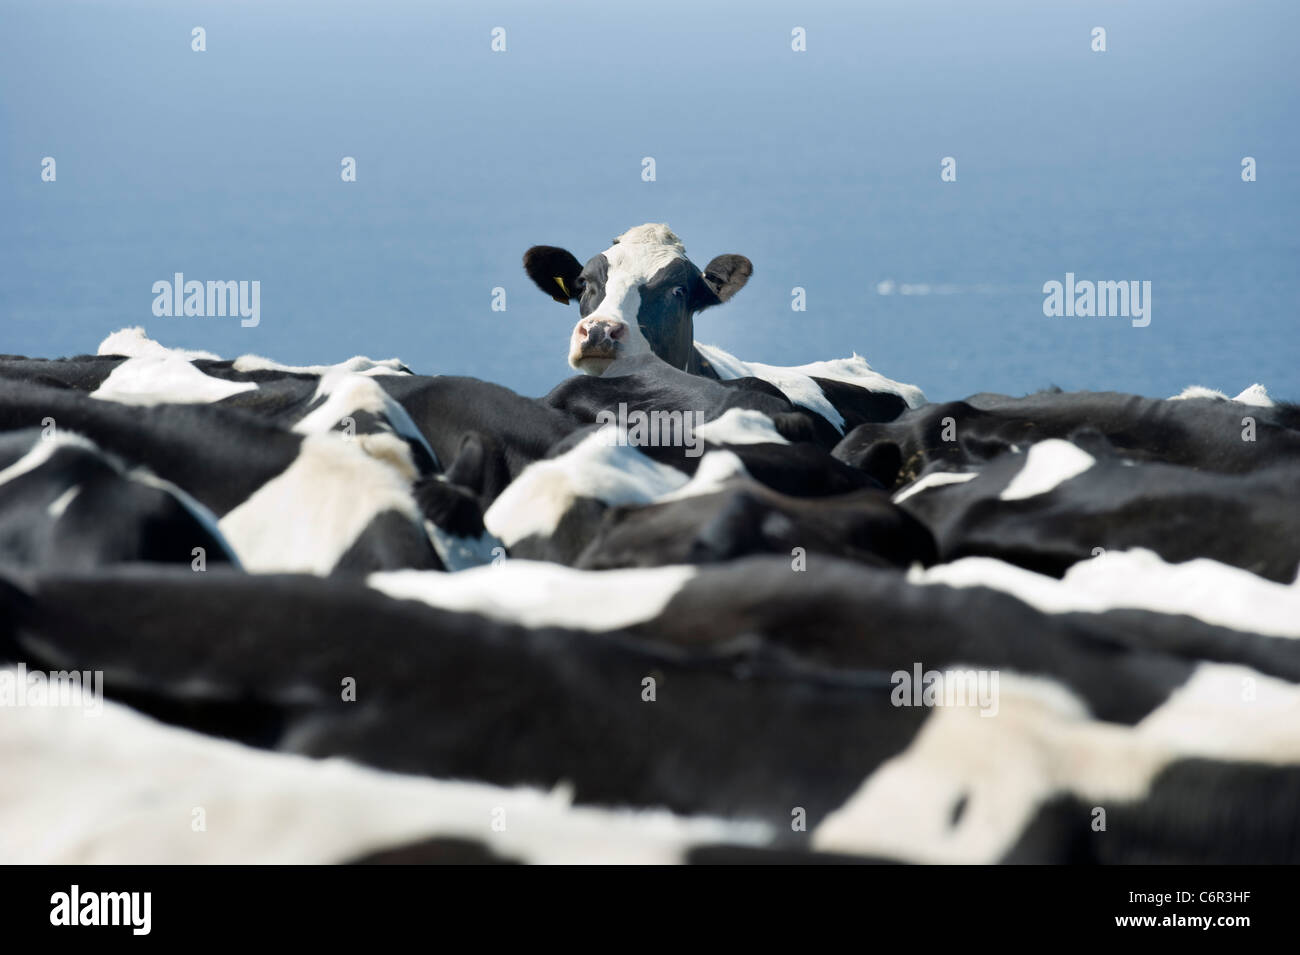 A lone cow who seems to be fed up with being stuck in a herd. Stock Photo